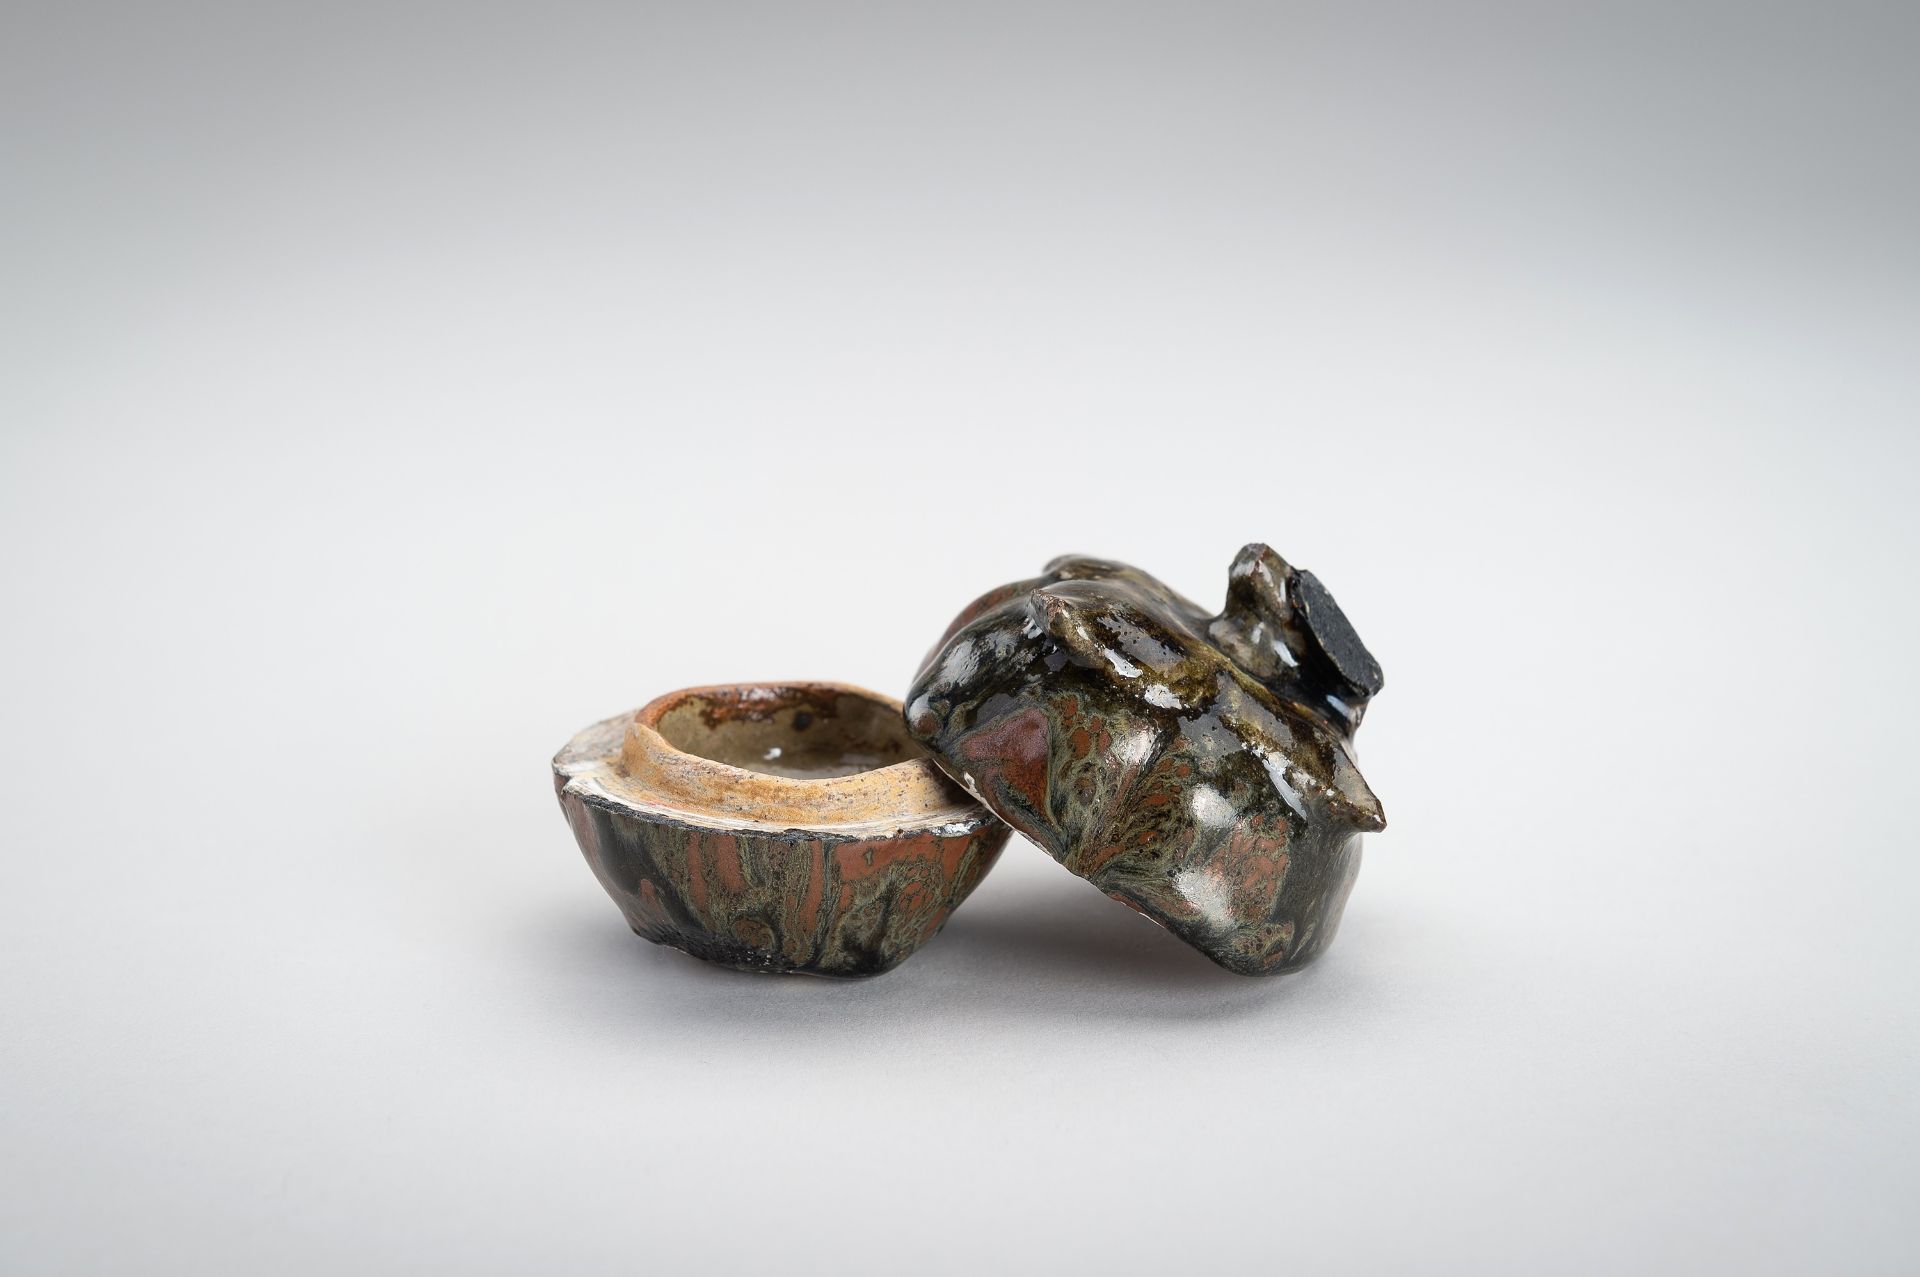 A GROUP OF FOUR SMALL GLAZED CERAMIC ITEMS - Image 10 of 16